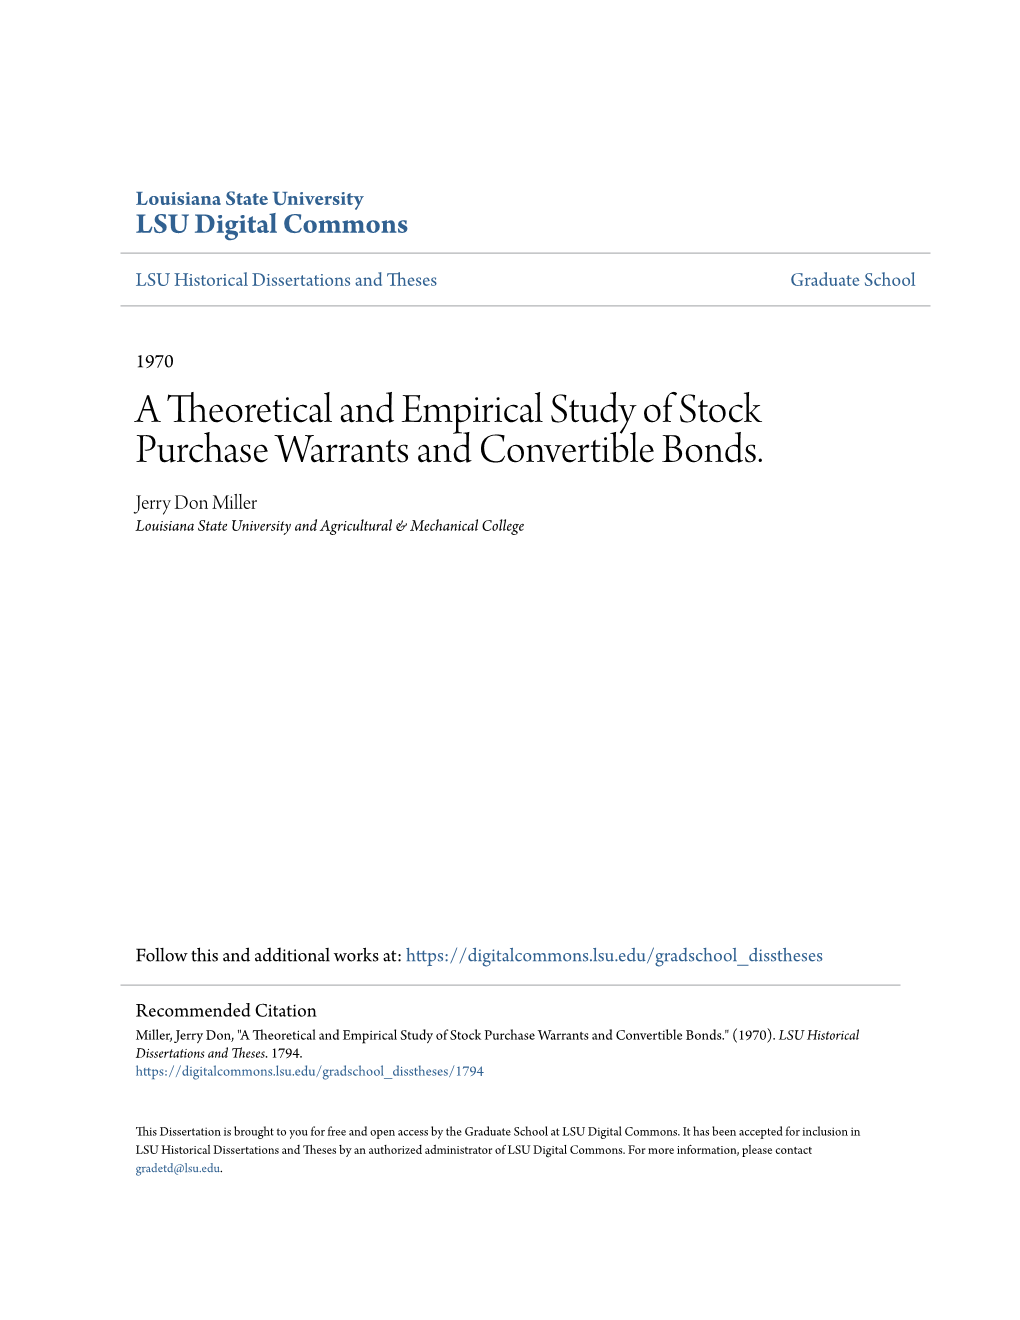 A Theoretical and Empirical Study of Stock Purchase Warrants and Convertible Bonds